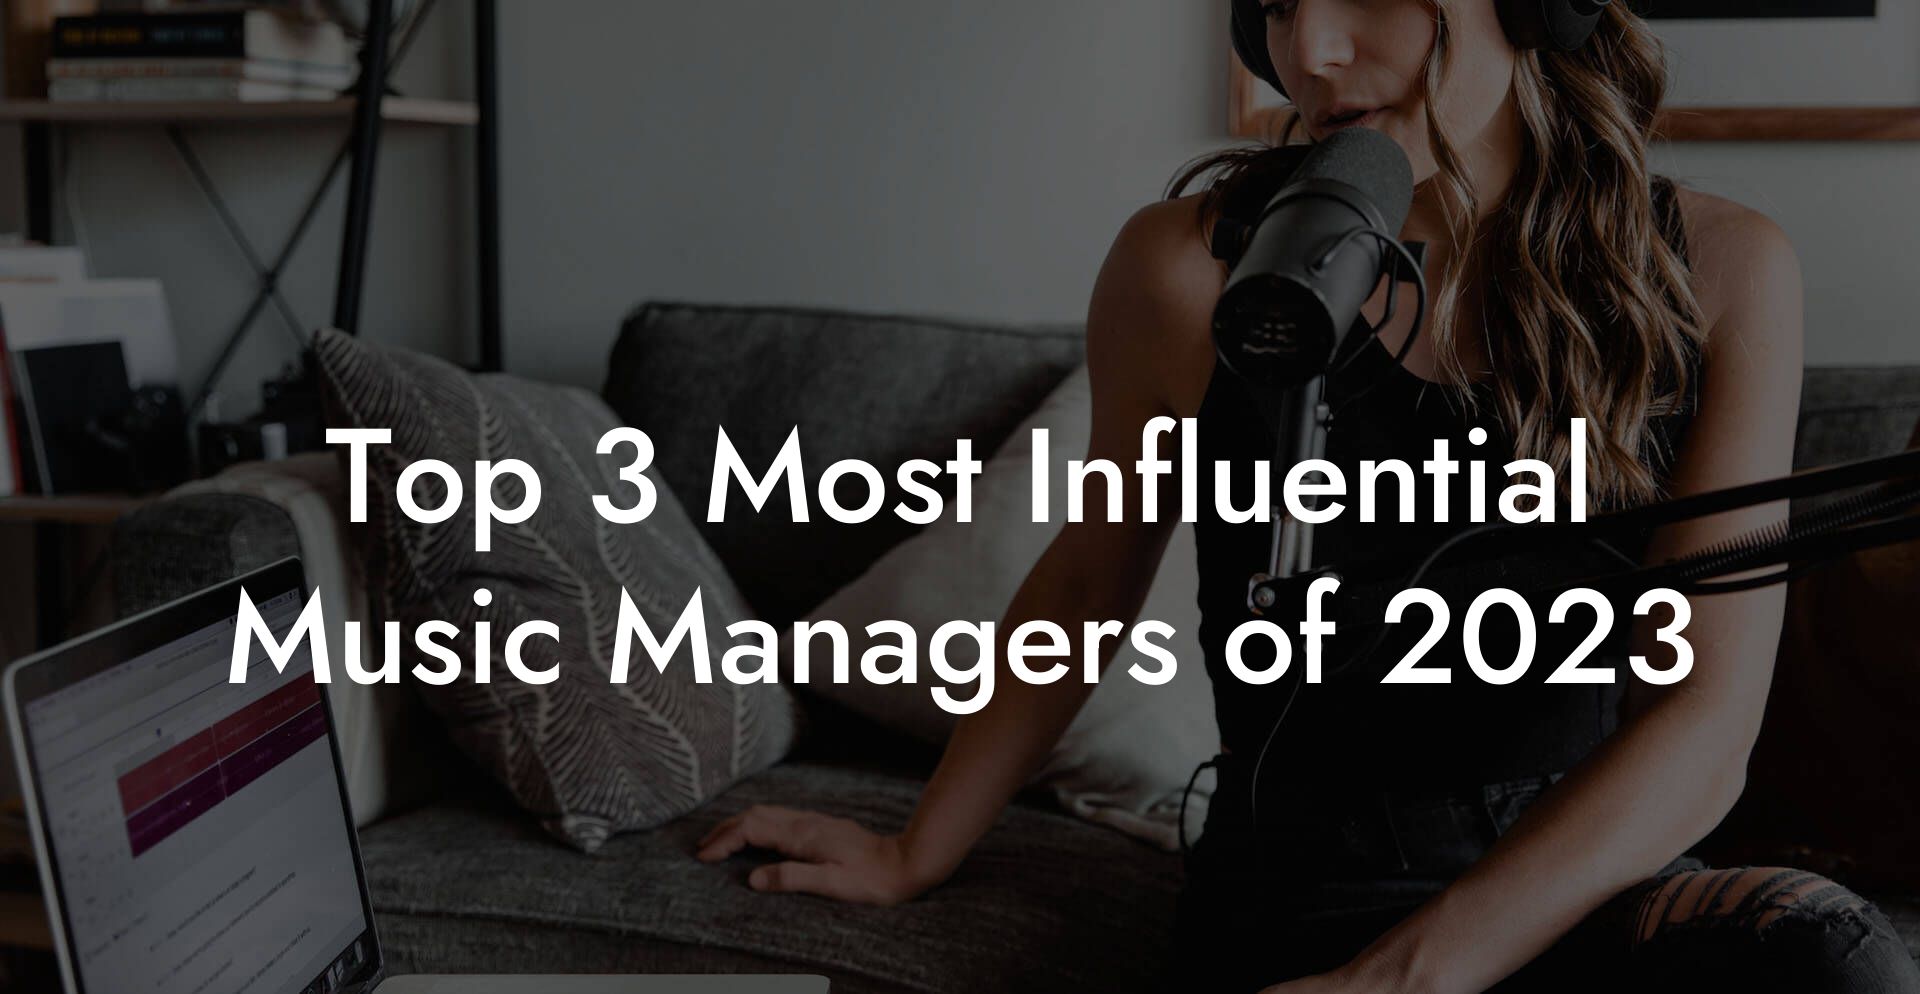 Top 3 Most Influential Music Managers of 2023